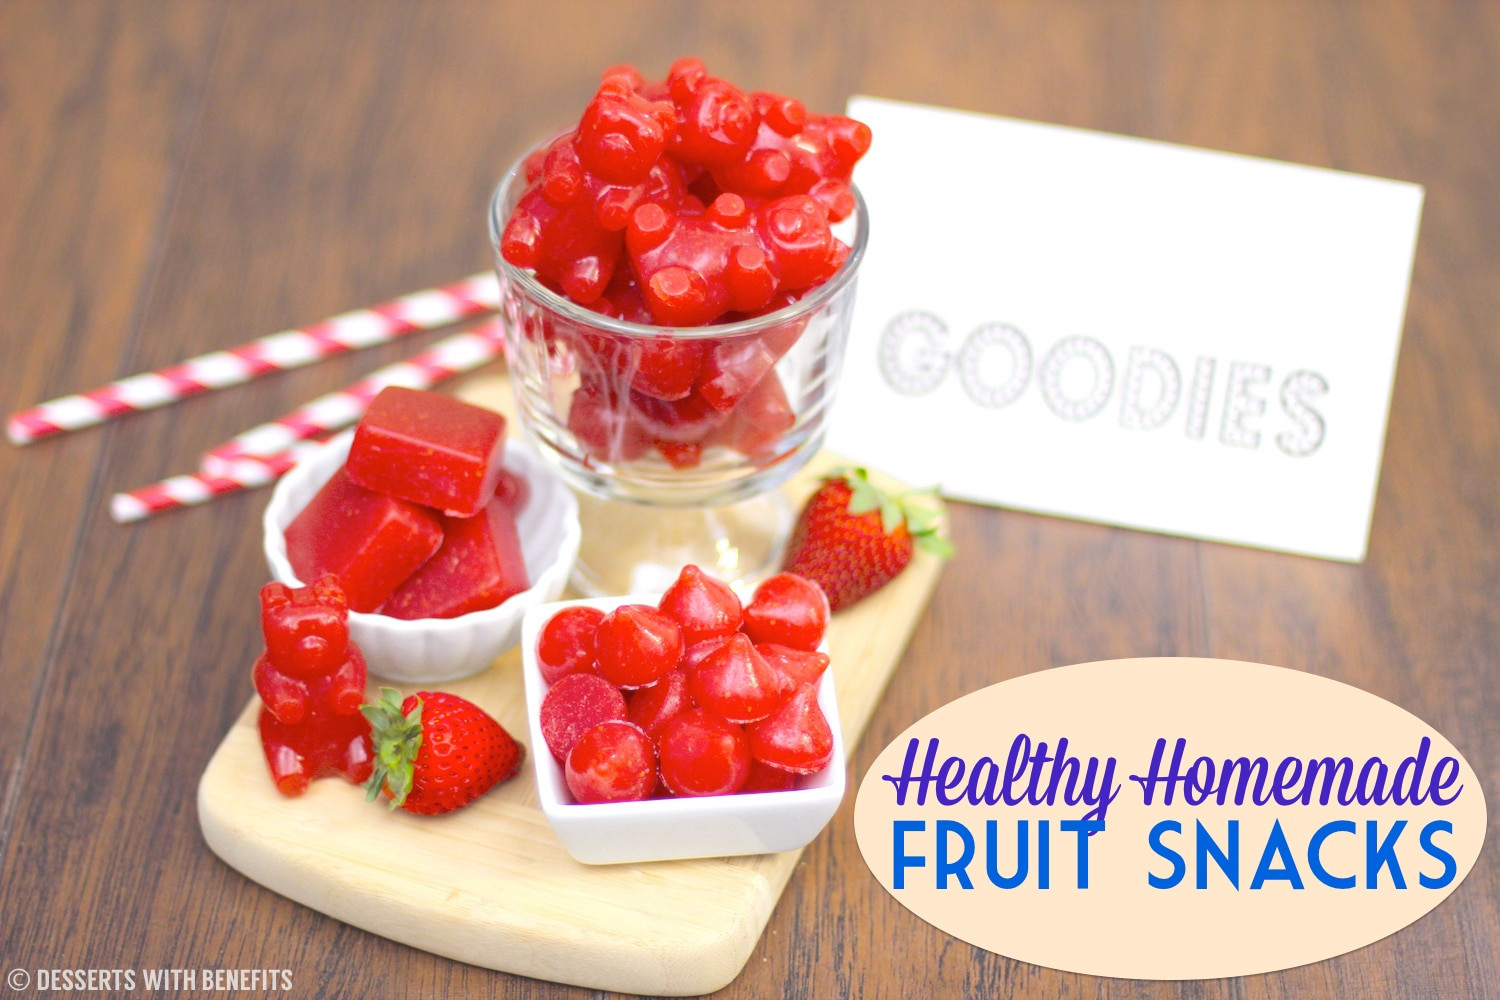 Healthy Homemade Desserts
 Healthy Homemade Fruit Snacks Desserts with Benefits